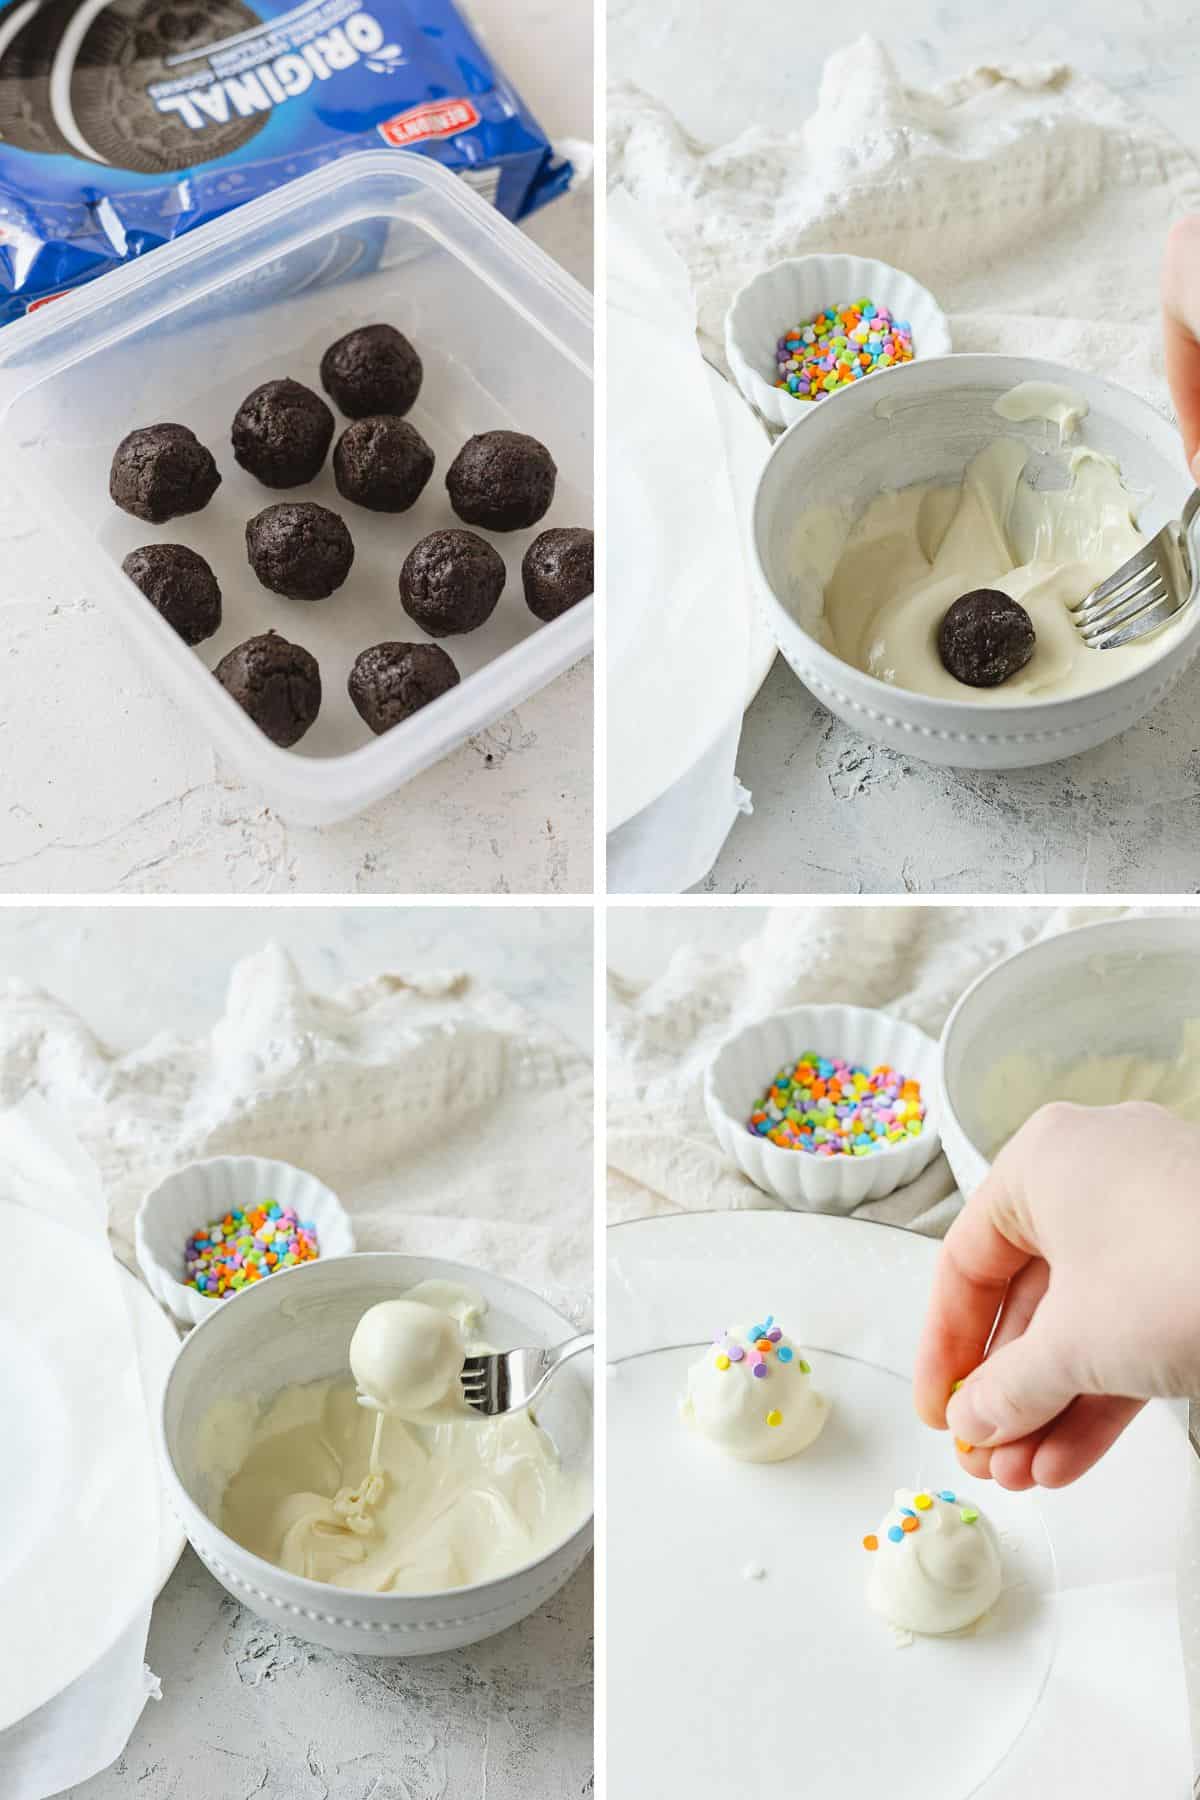 Process of dipping frozen Oreo truffles in white chocolate and adding sprinkles.